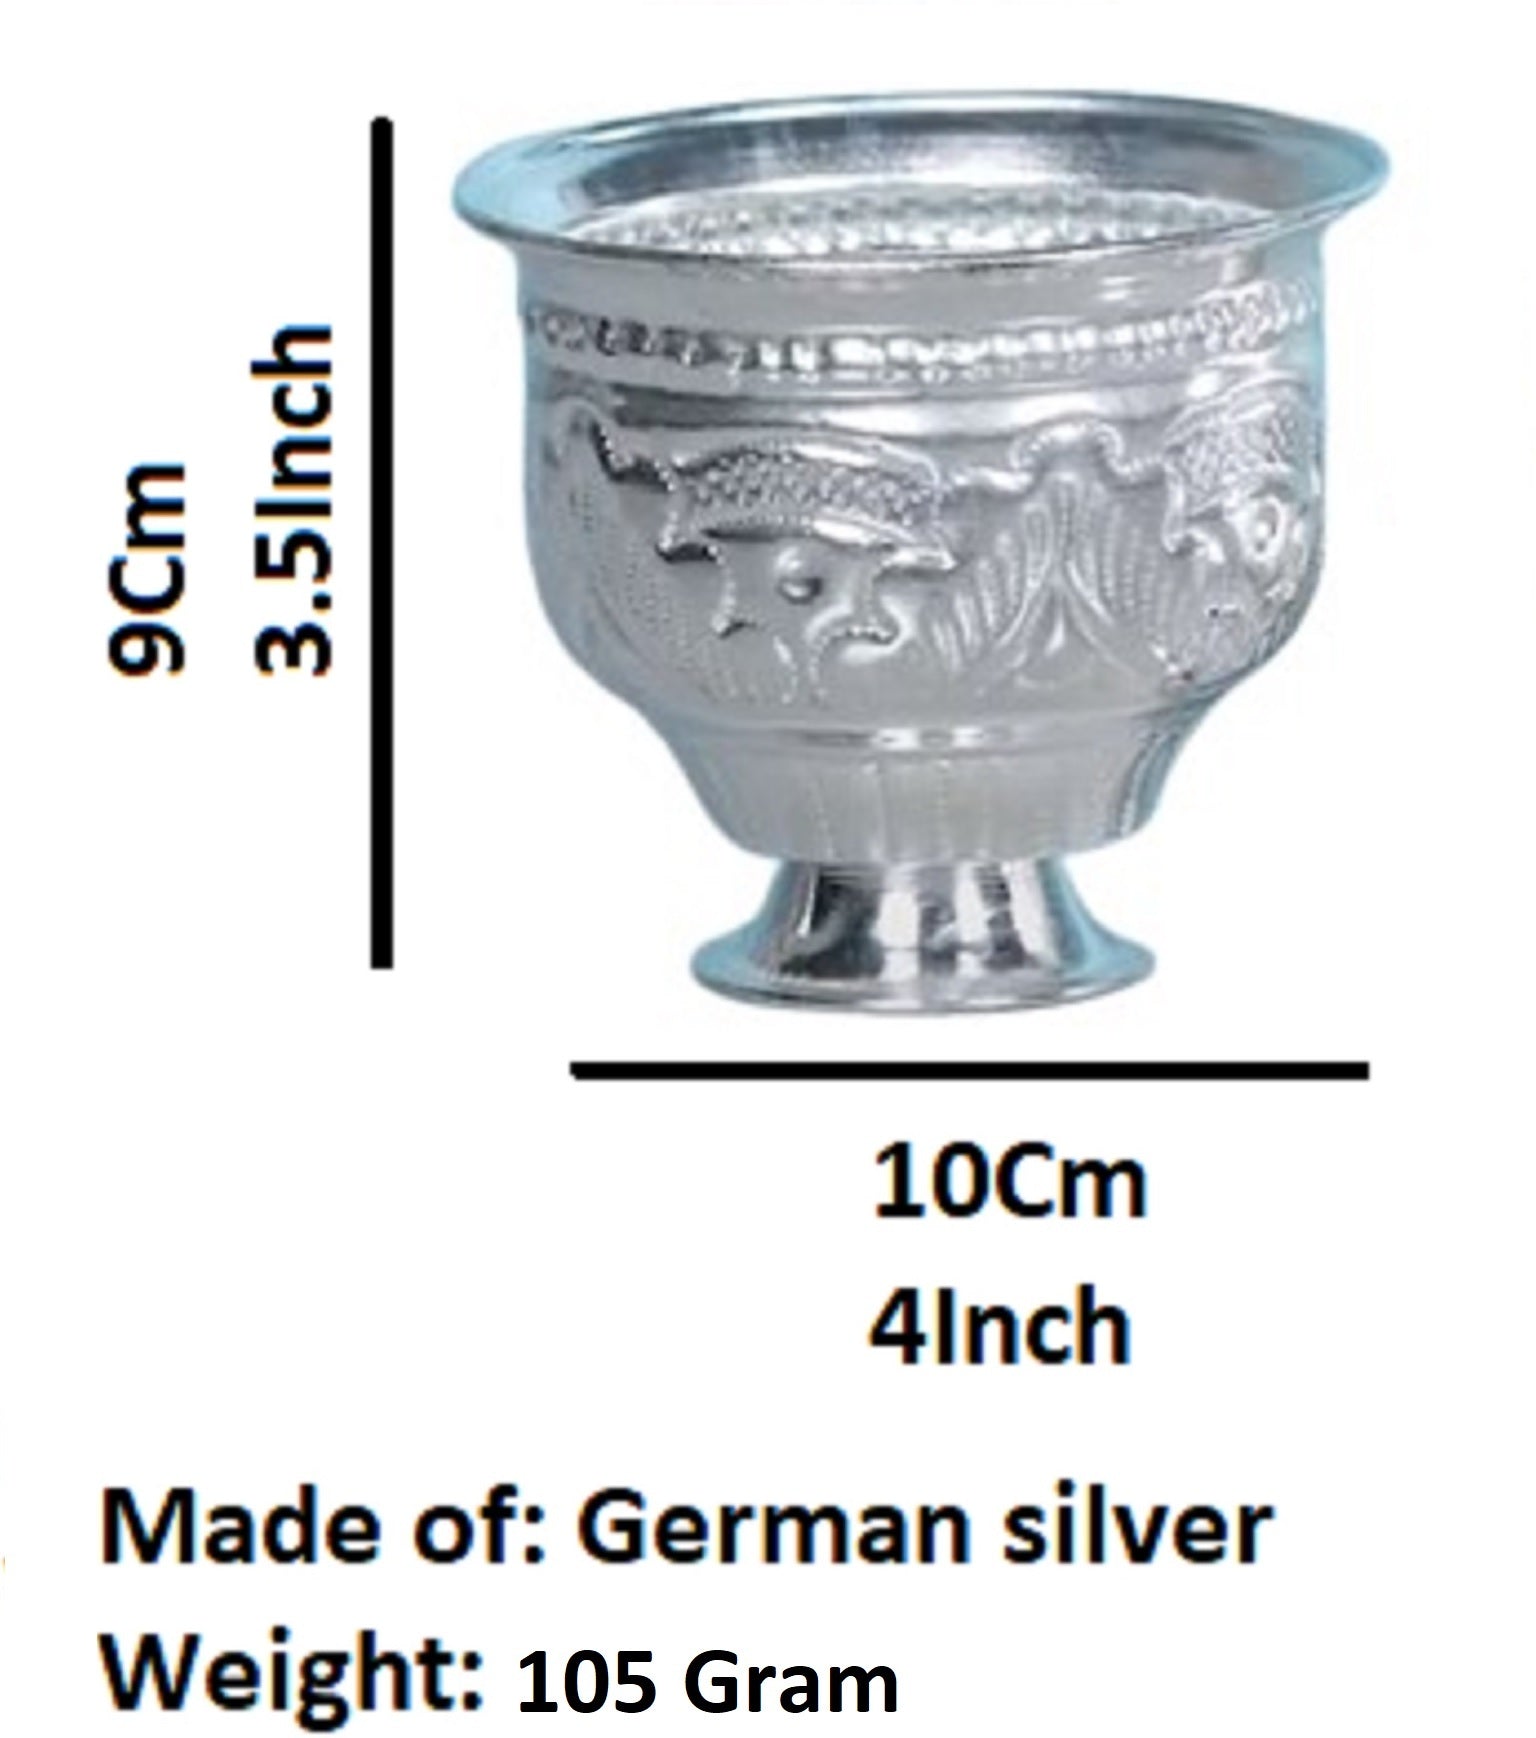 German Silver KumKum Barani is best for Home, Office and Temple Poojas K3111